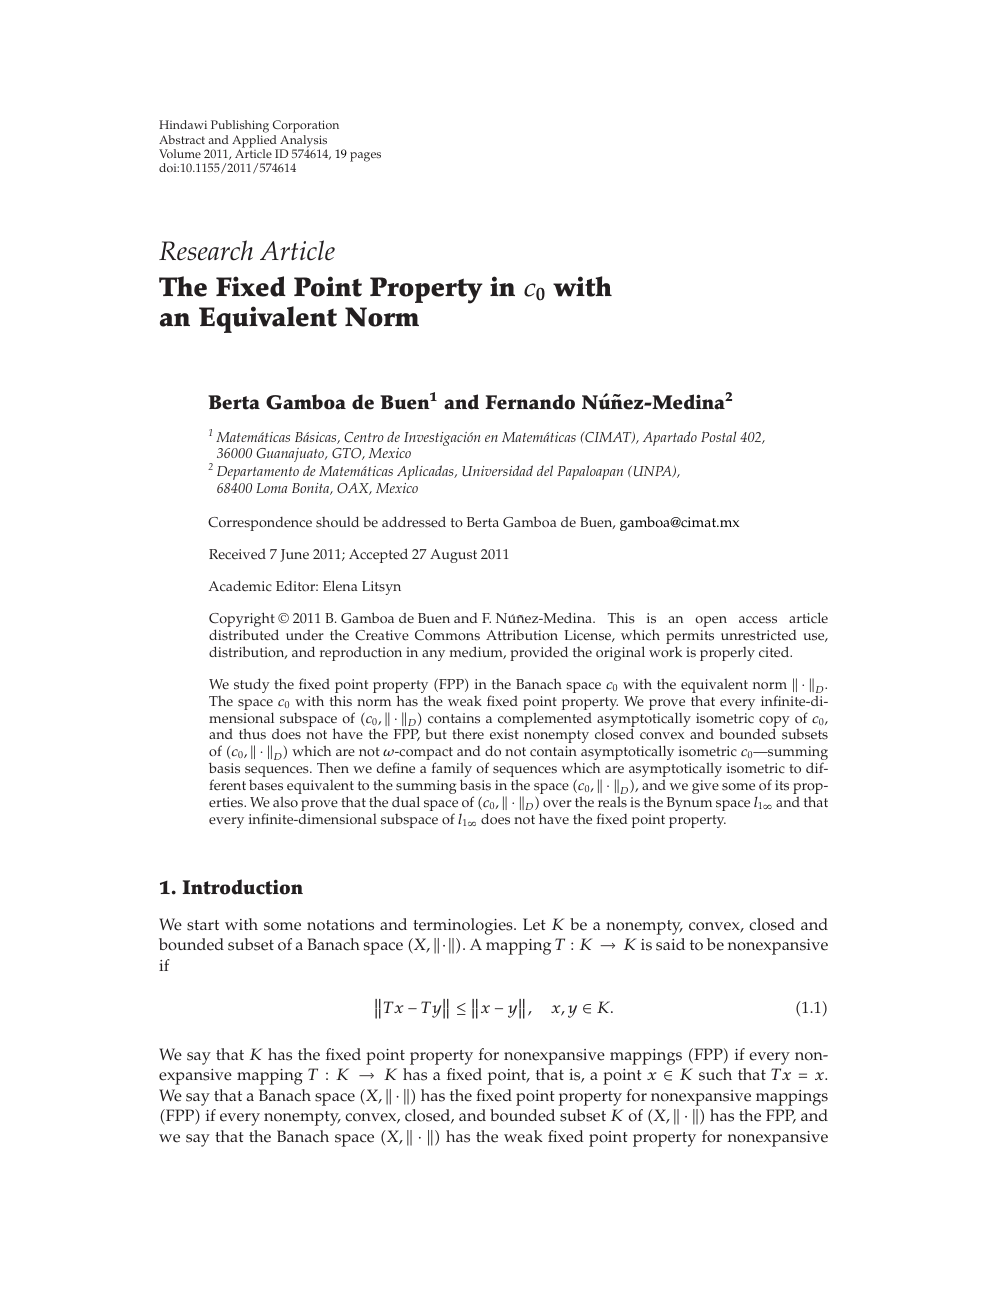 The Fixed Point Property In C 0 With An Equivalent Norm Topic Of Research Paper In Mathematics Download Scholarly Article Pdf And Read For Free On Cyberleninka Open Science Hub